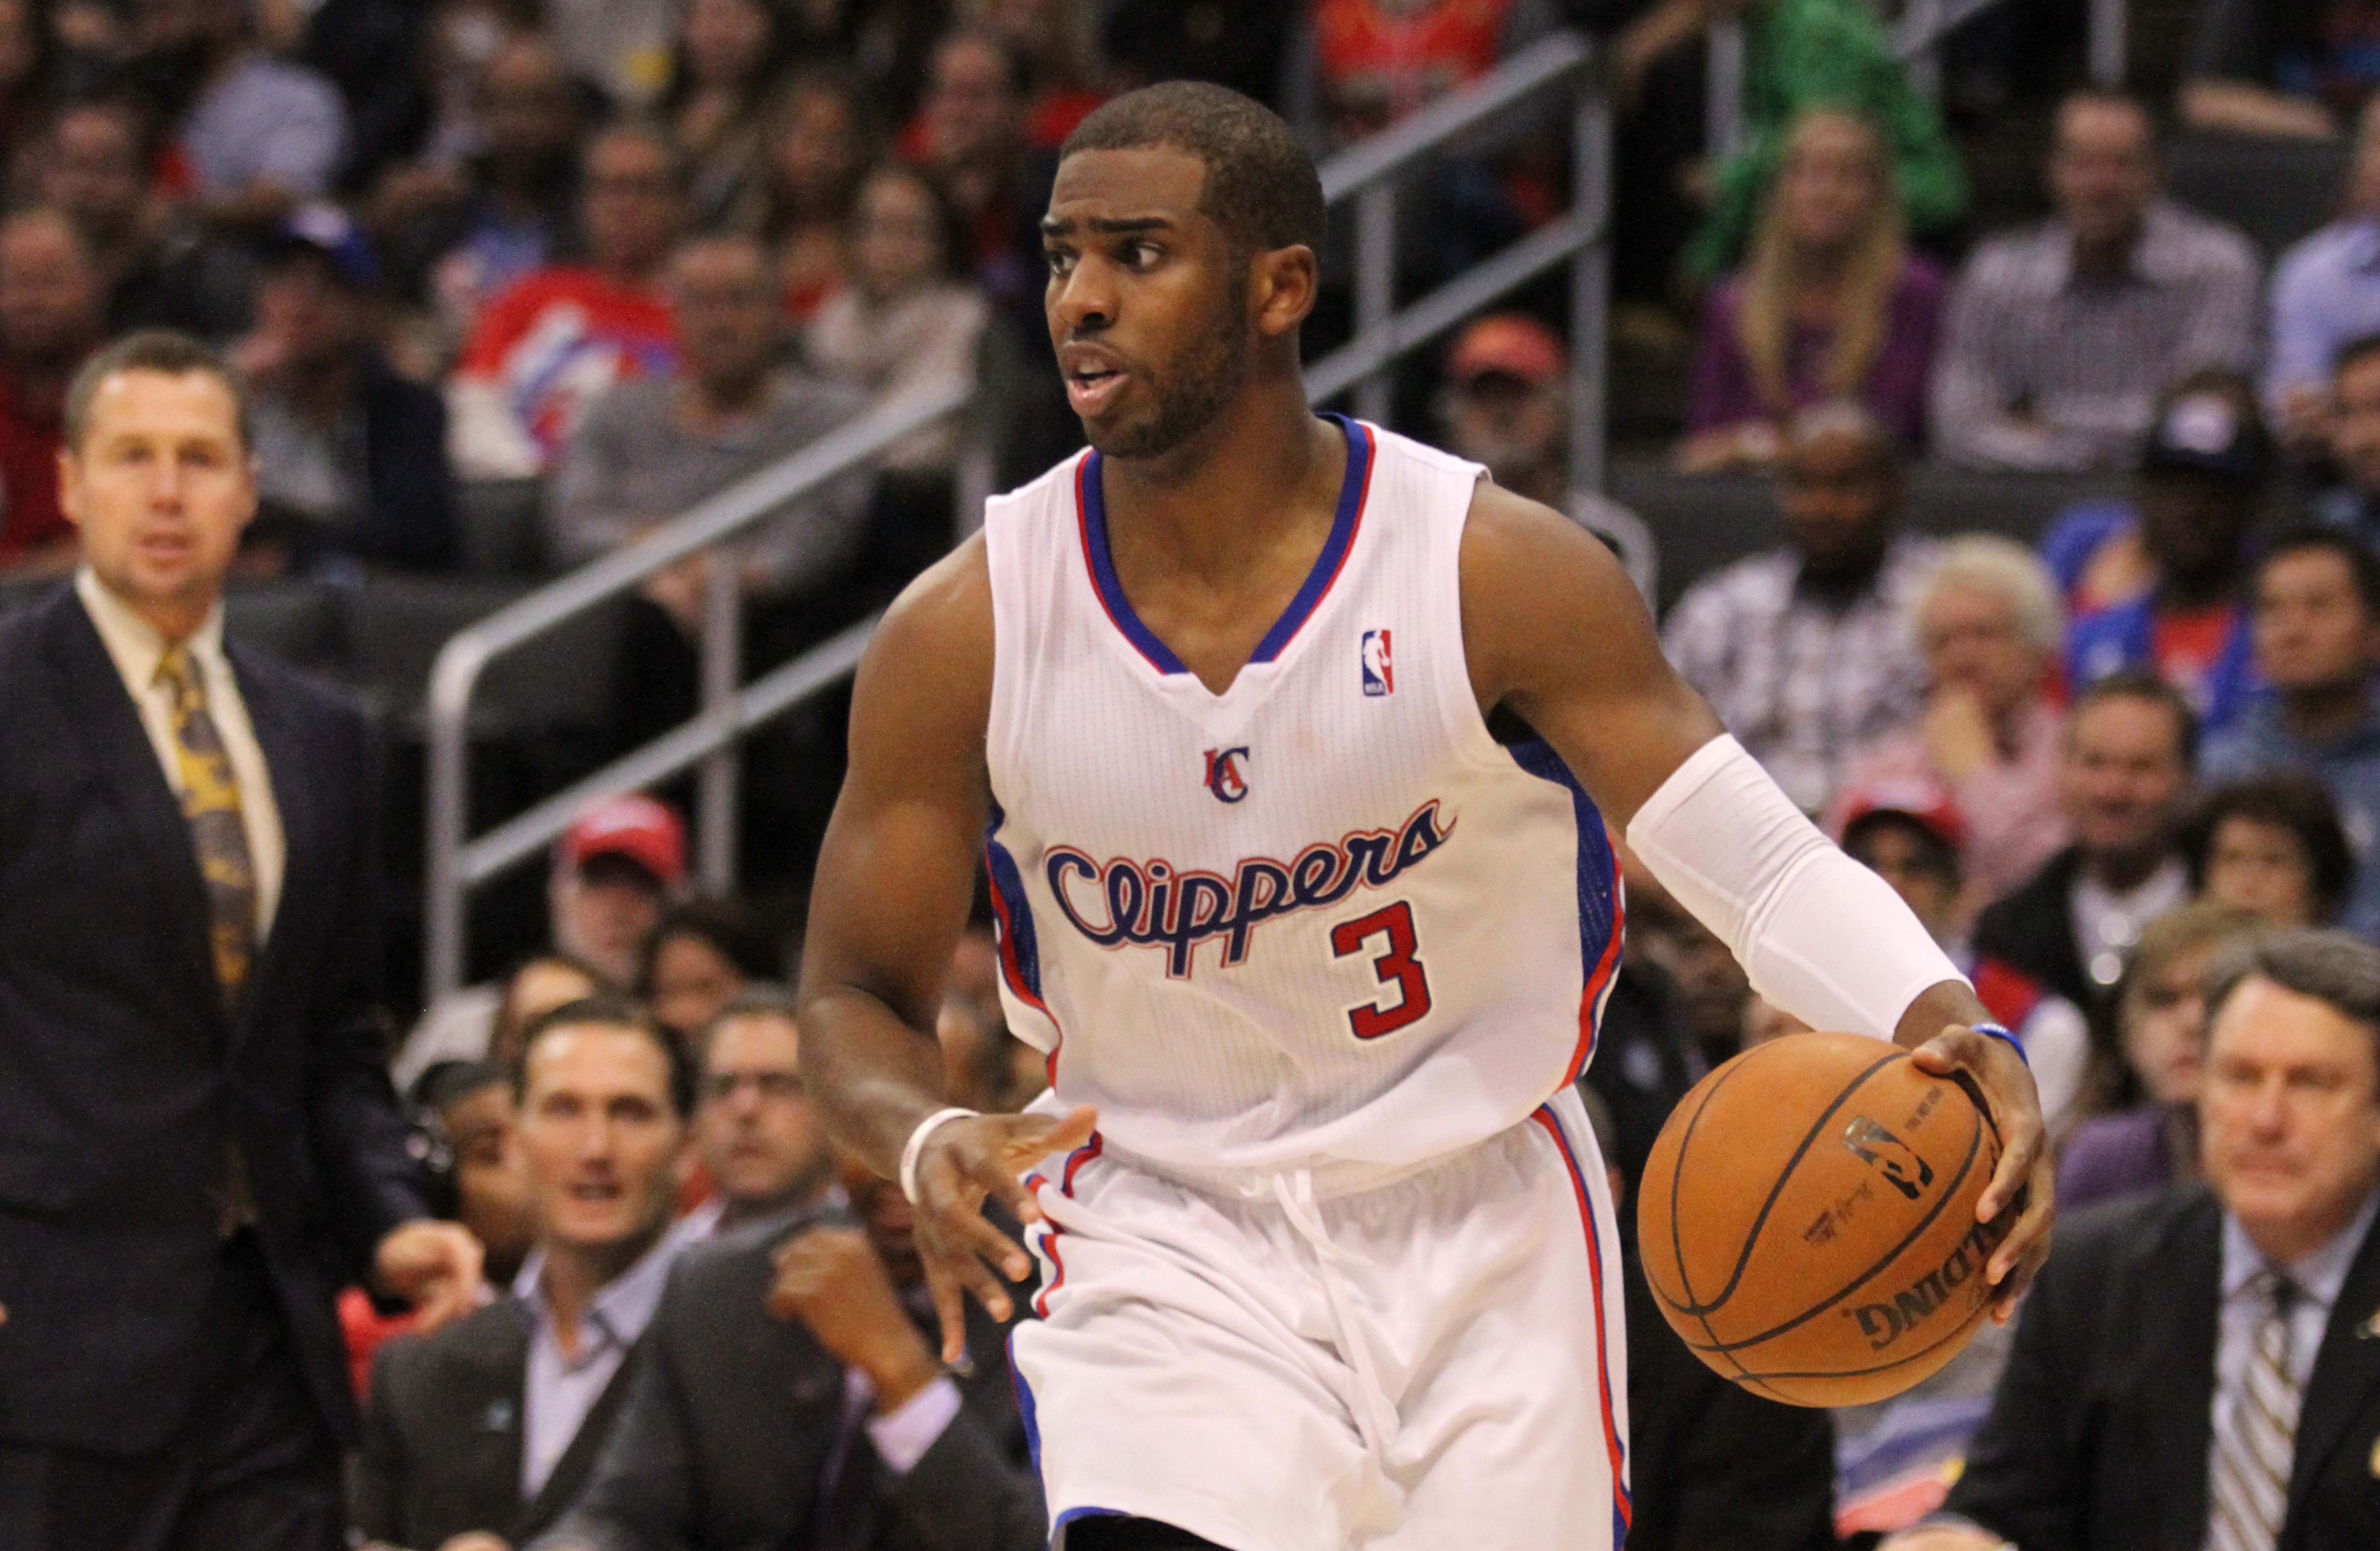 5 Fun Facts About Chris Paul